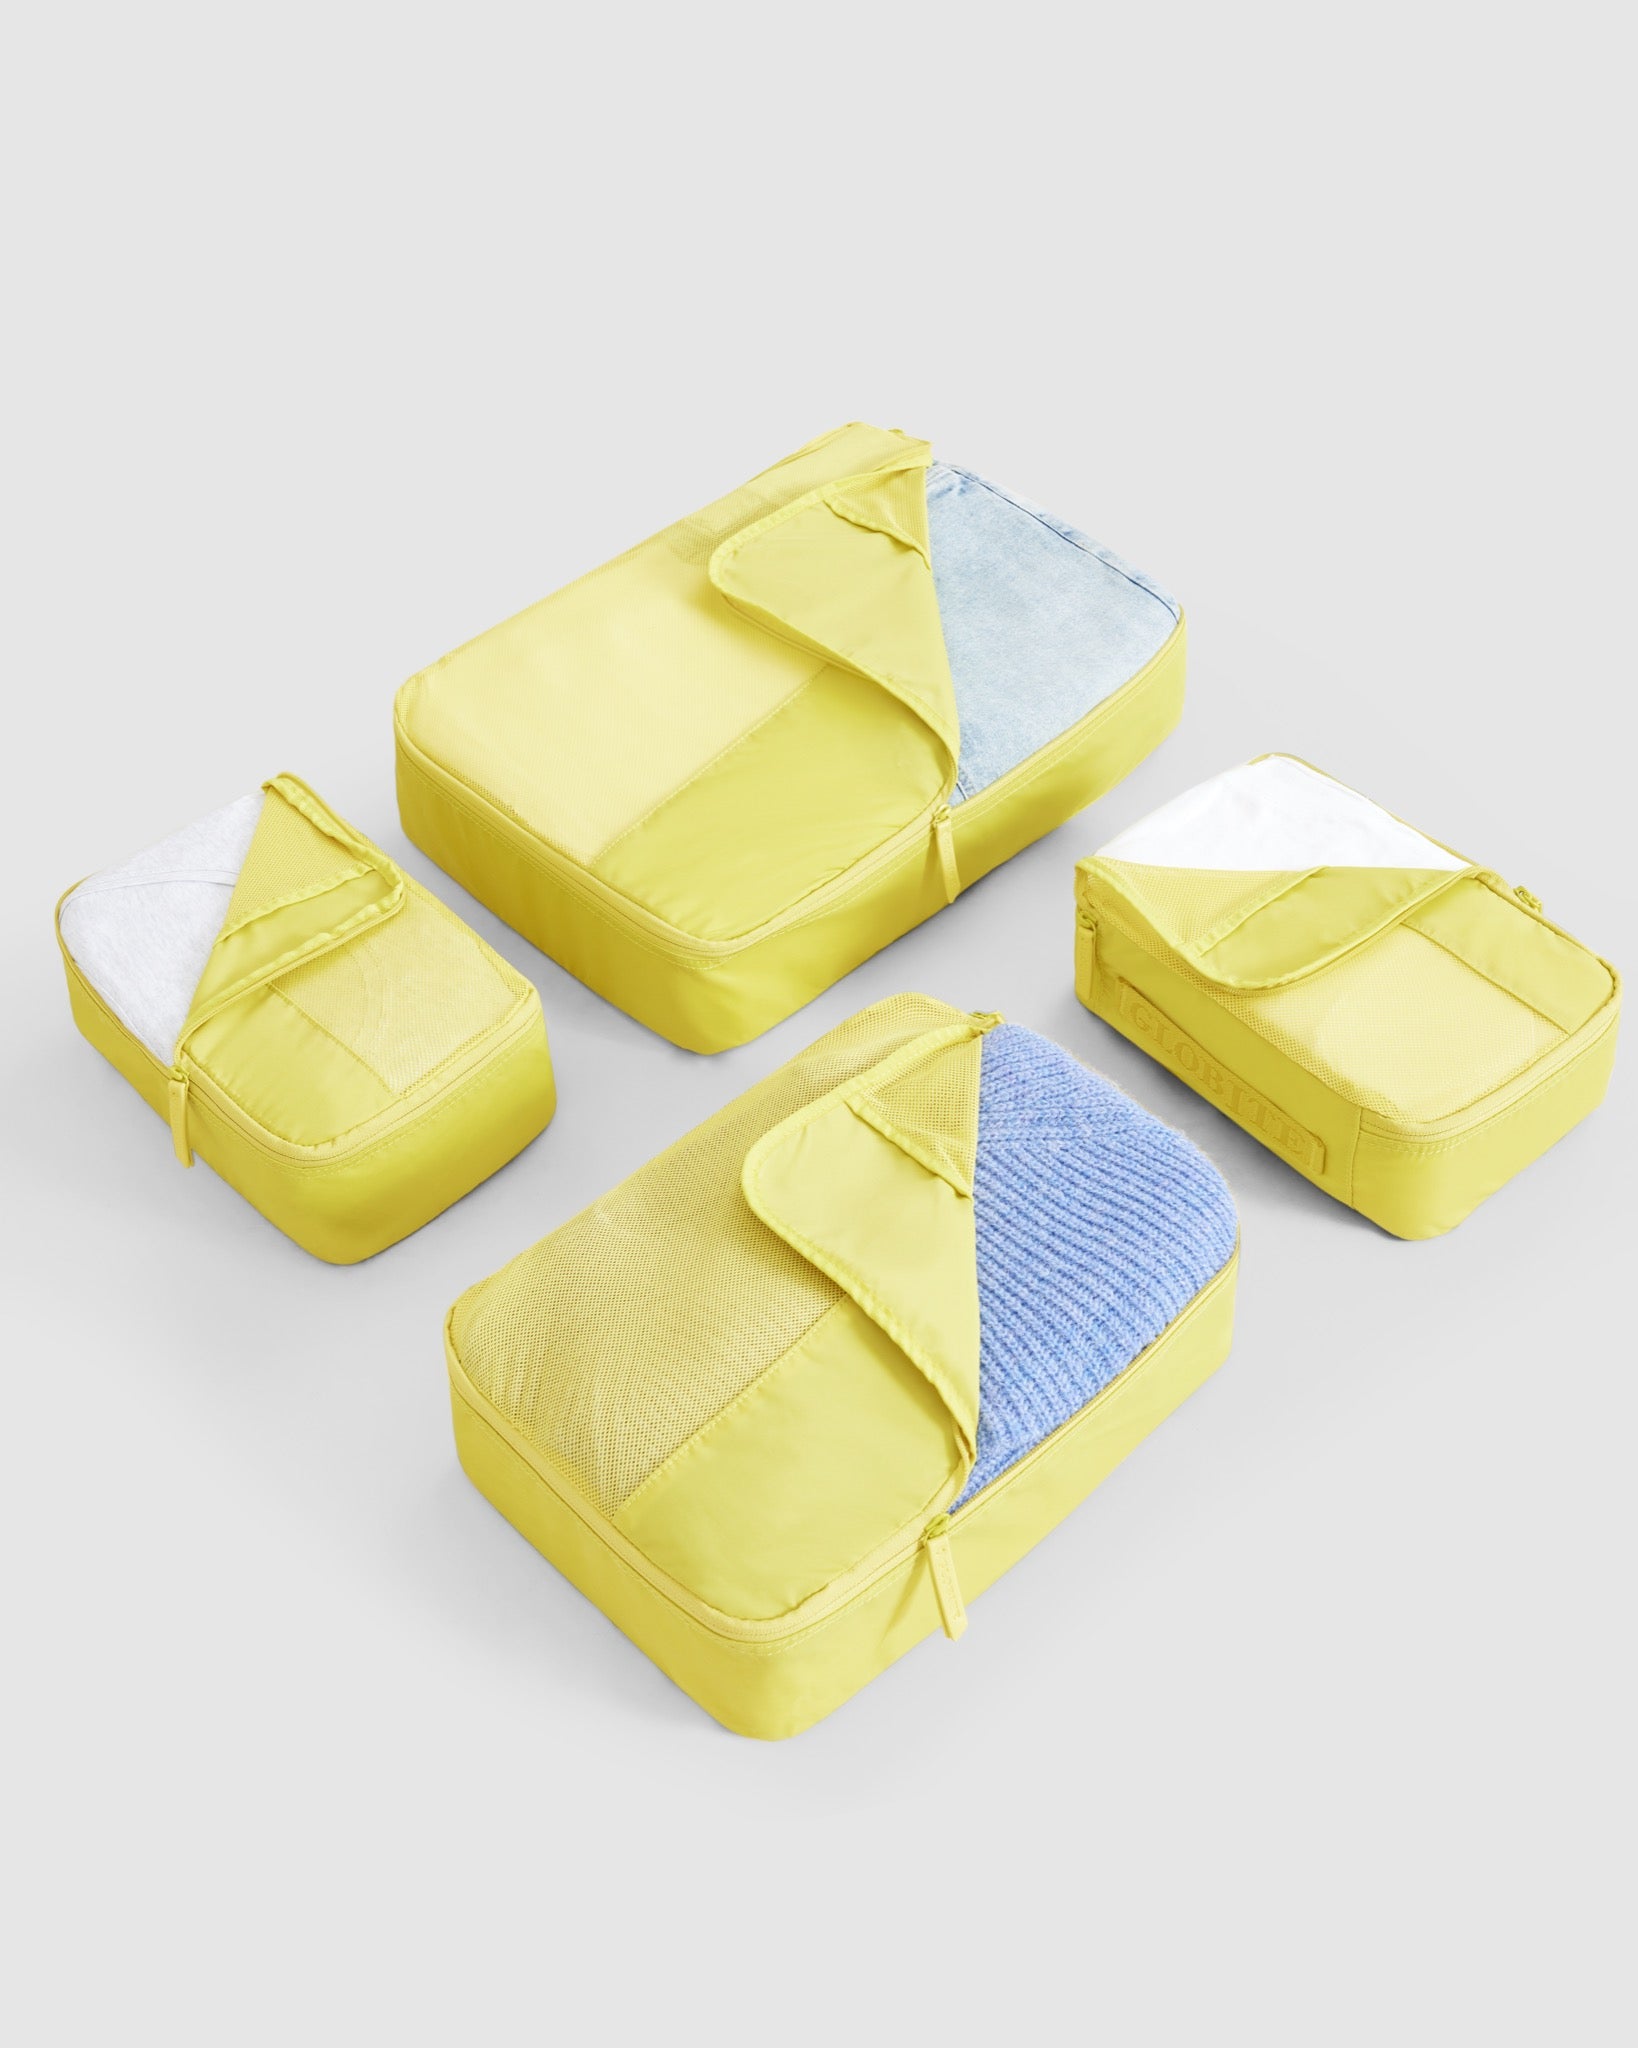 Endive 4 Piece Packing Cube